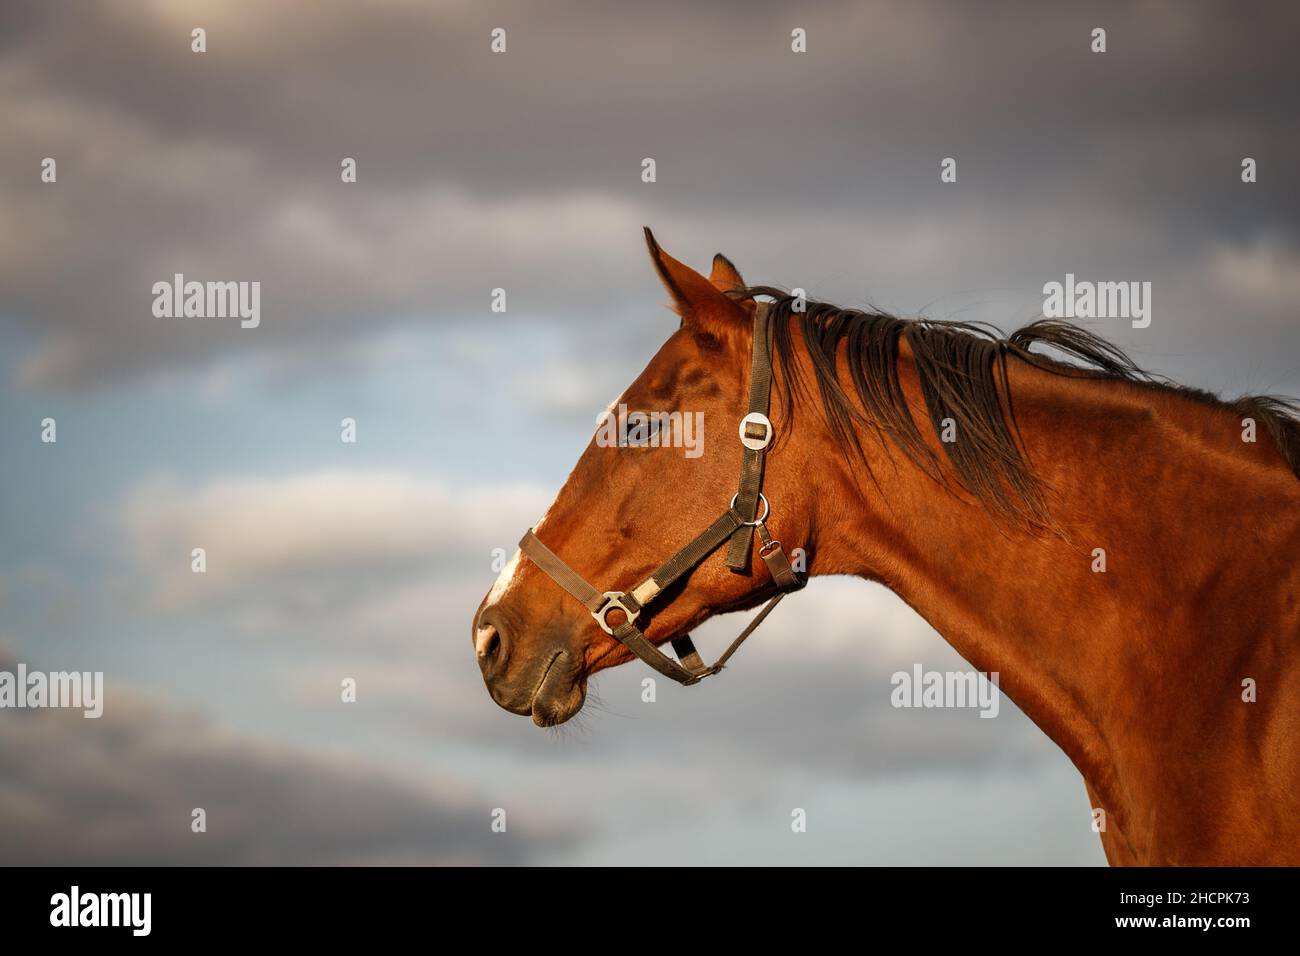 Portrait of thoroughbred horse head against cloudy sky Stock Photo